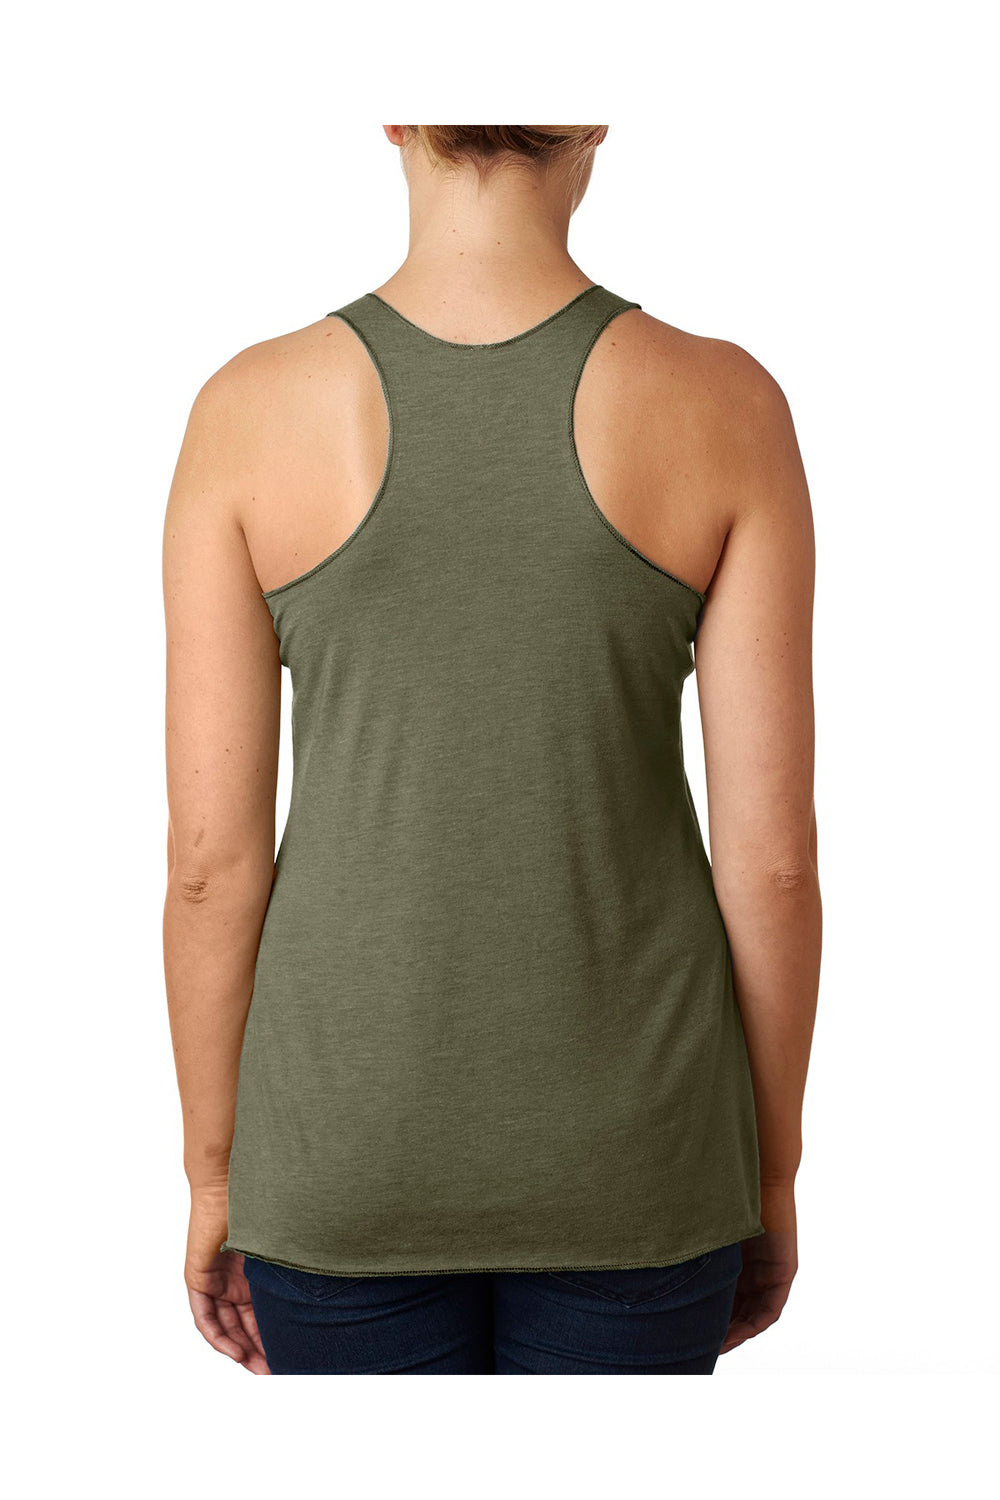 Next Level 6733 Womens Tank Top Military Green Back